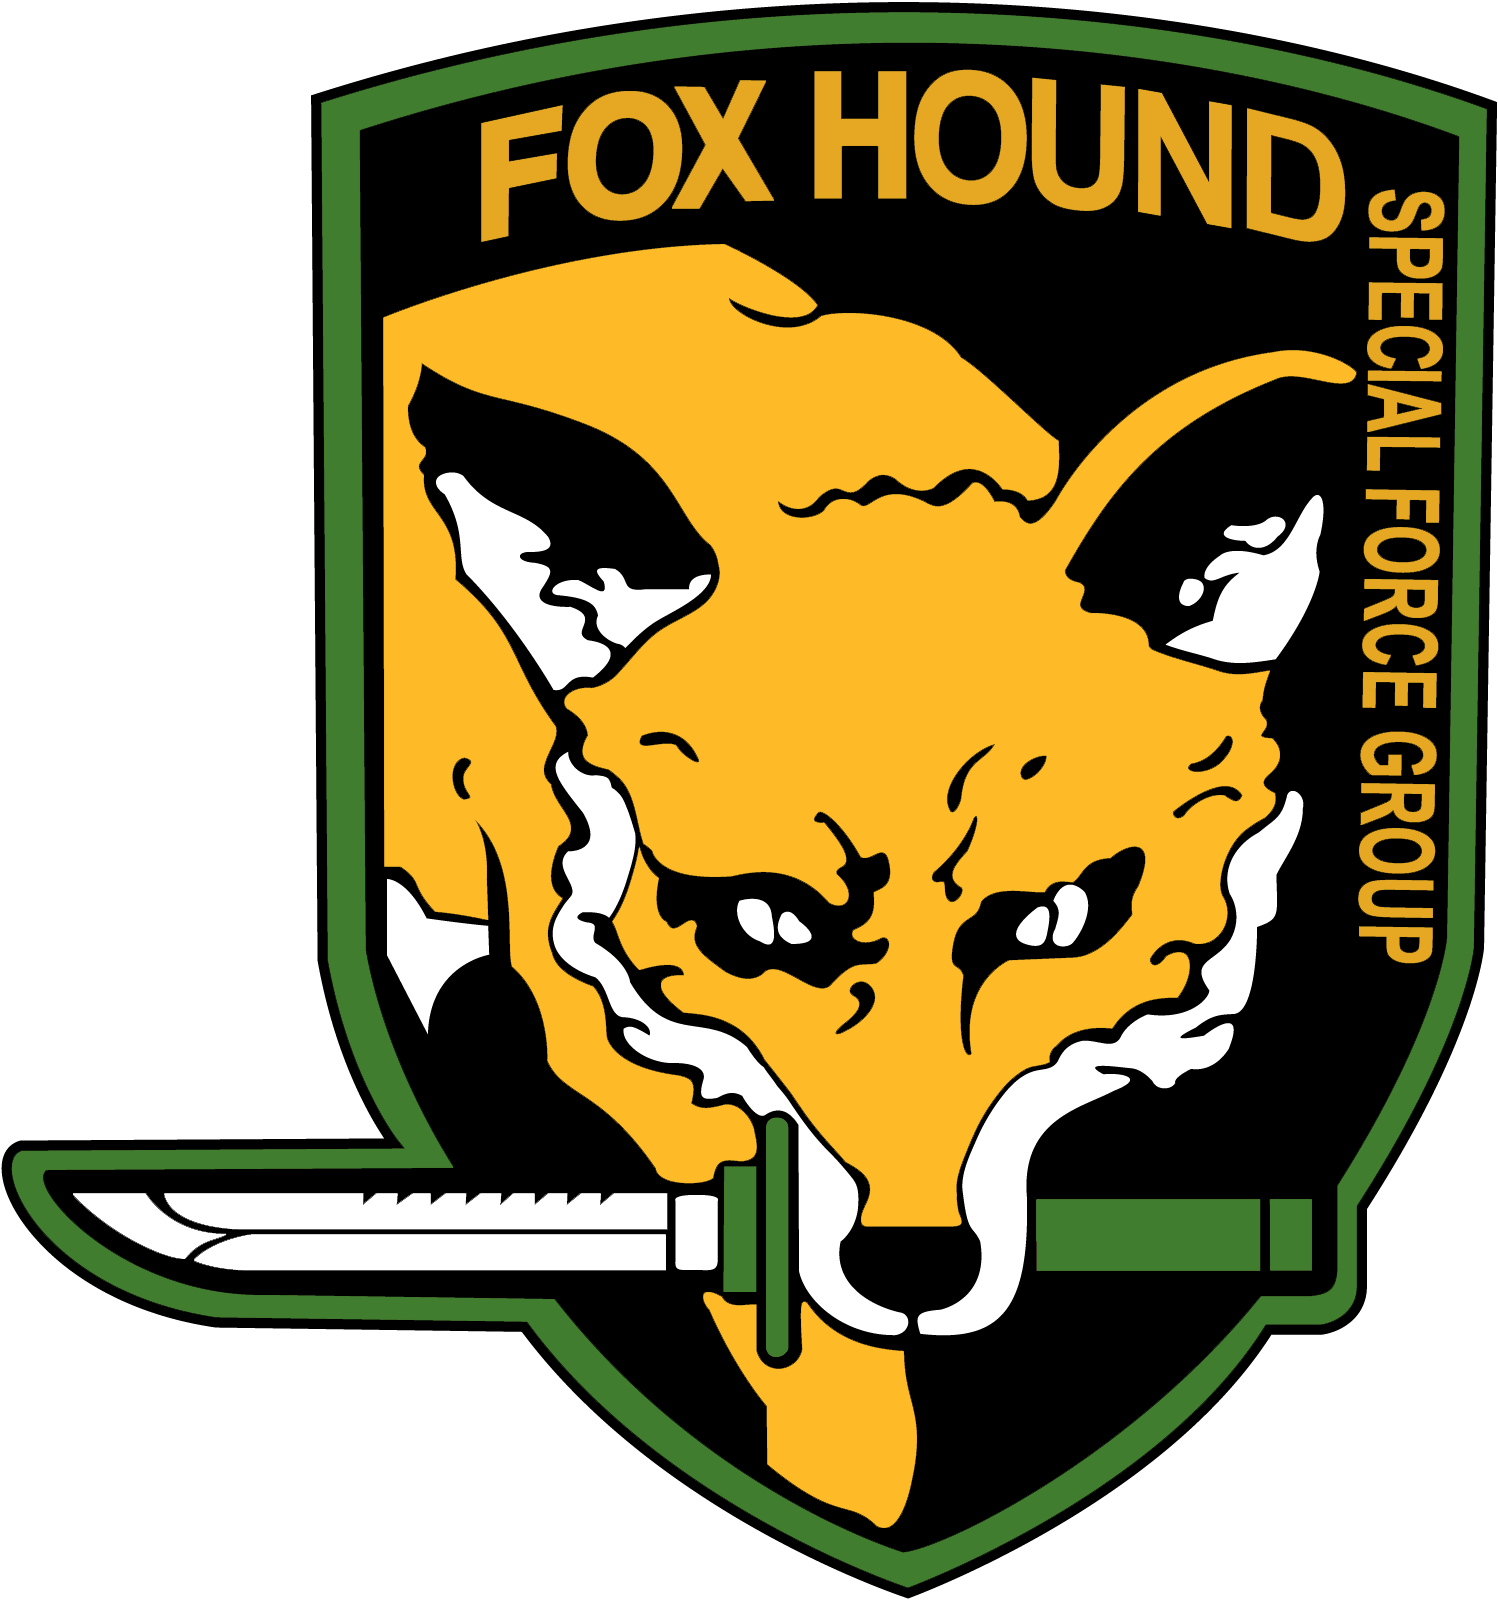 Fox Hound Special Forces Group Logo photo - 1